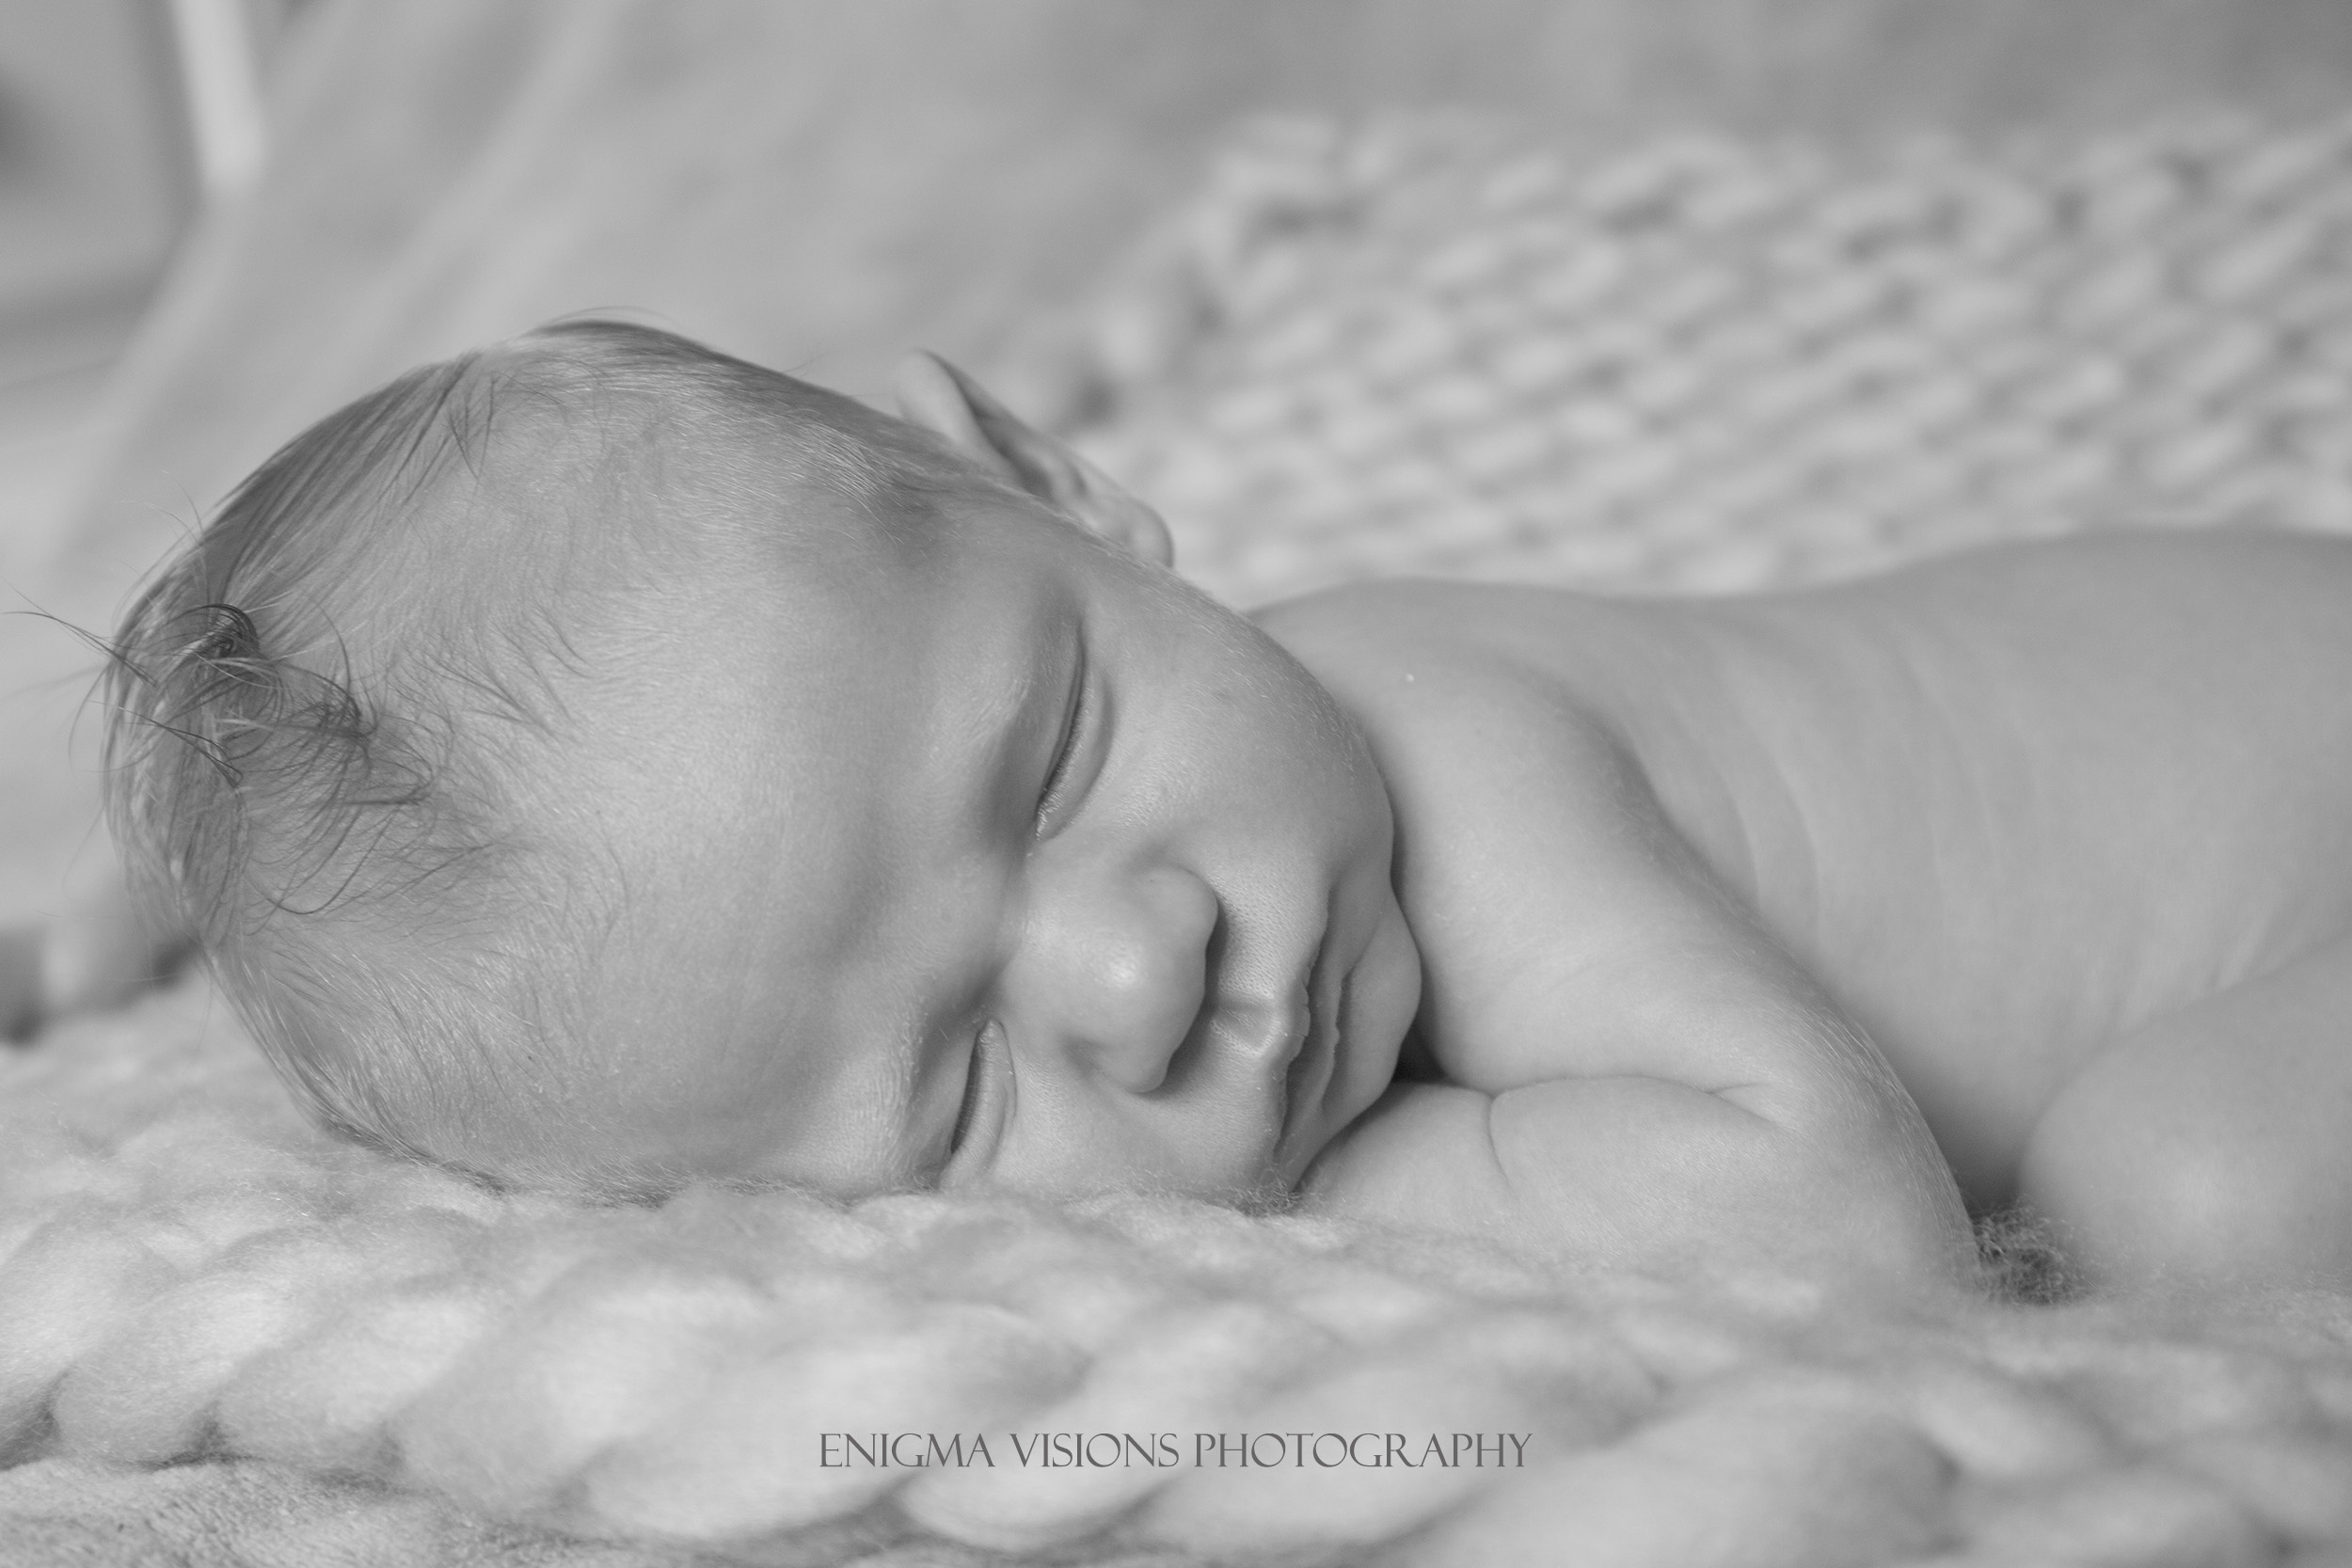 enigma_visions_photography_newborn_lifestyle_lux (3) copy.jpg